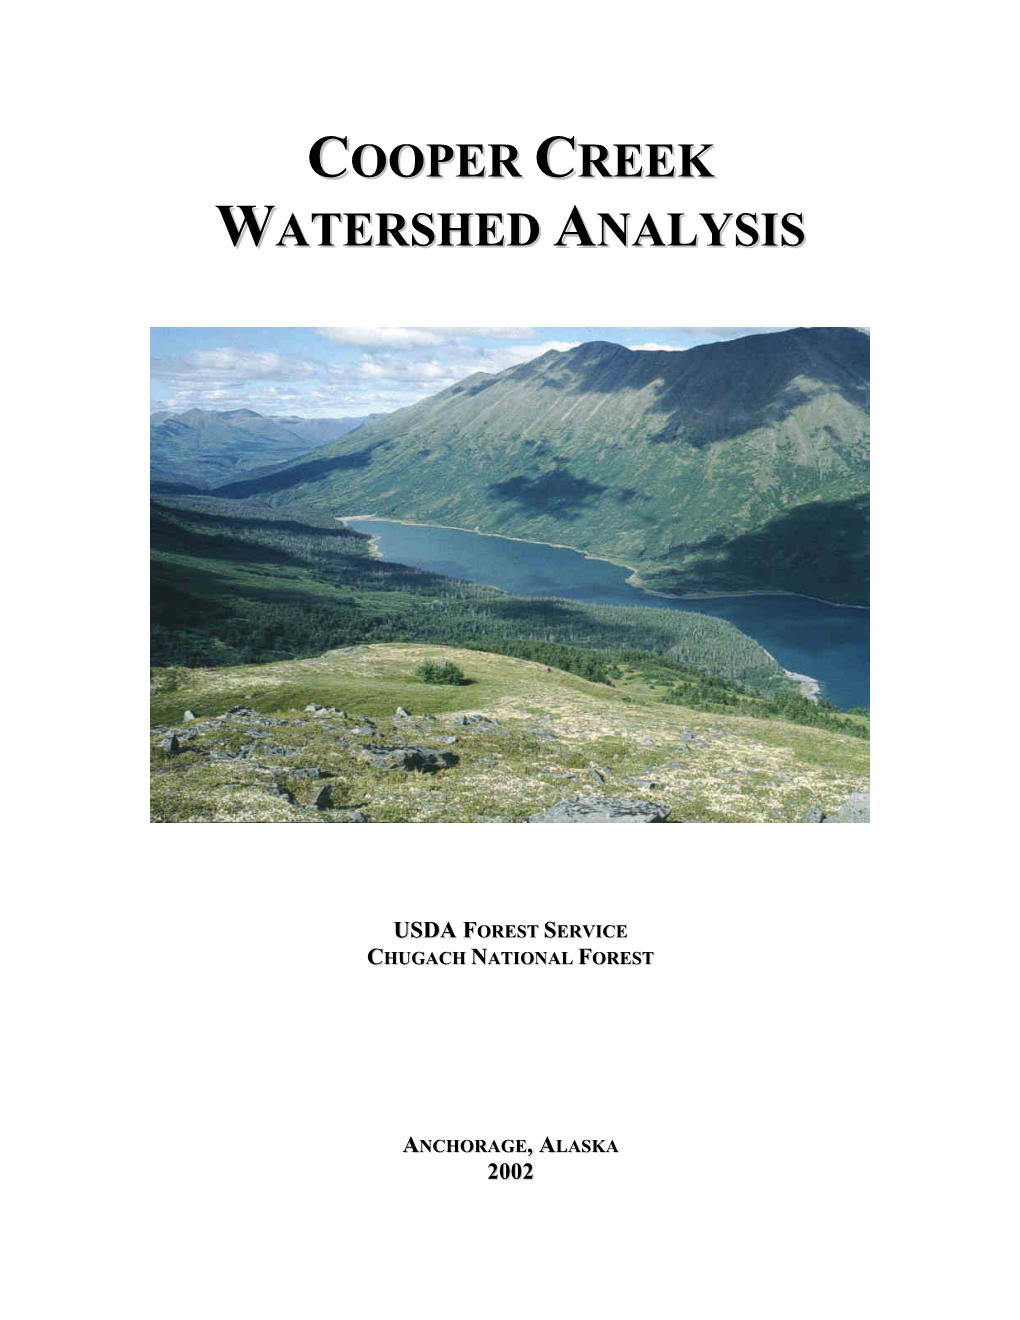 Cooper Creek Watershed Analysis Was Initiated in Response to the Pending Relicensing of the 20.6-Megawatt Cooper Lake Hydroelectric Project